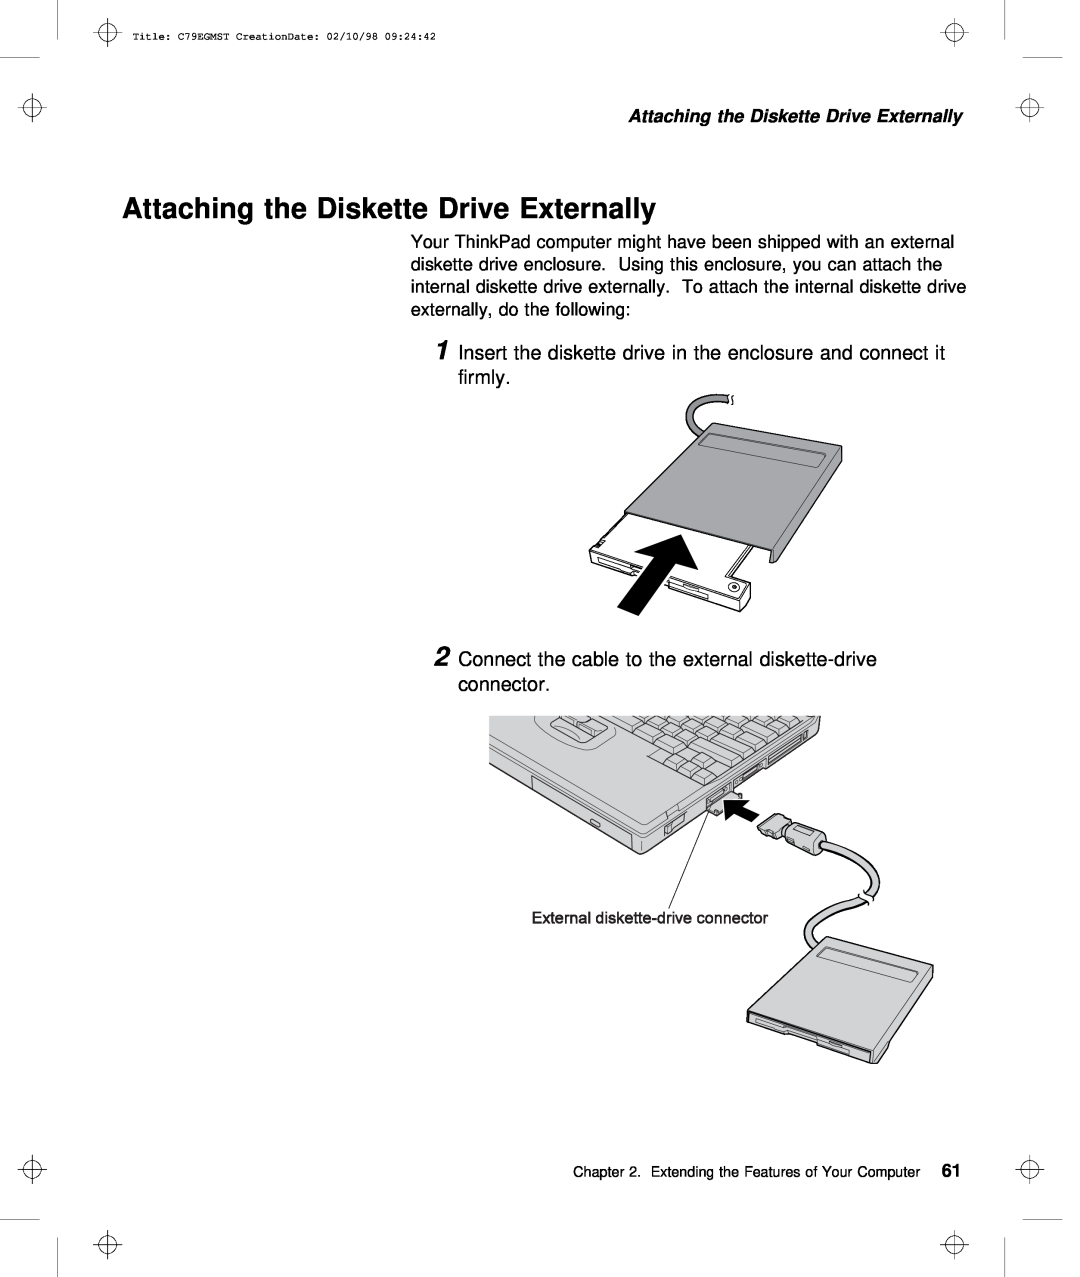 IBM C79EGMST manual Attaching the Diskette Drive Externally, 1Insert the diskette drive in the enclosure and c firmly 